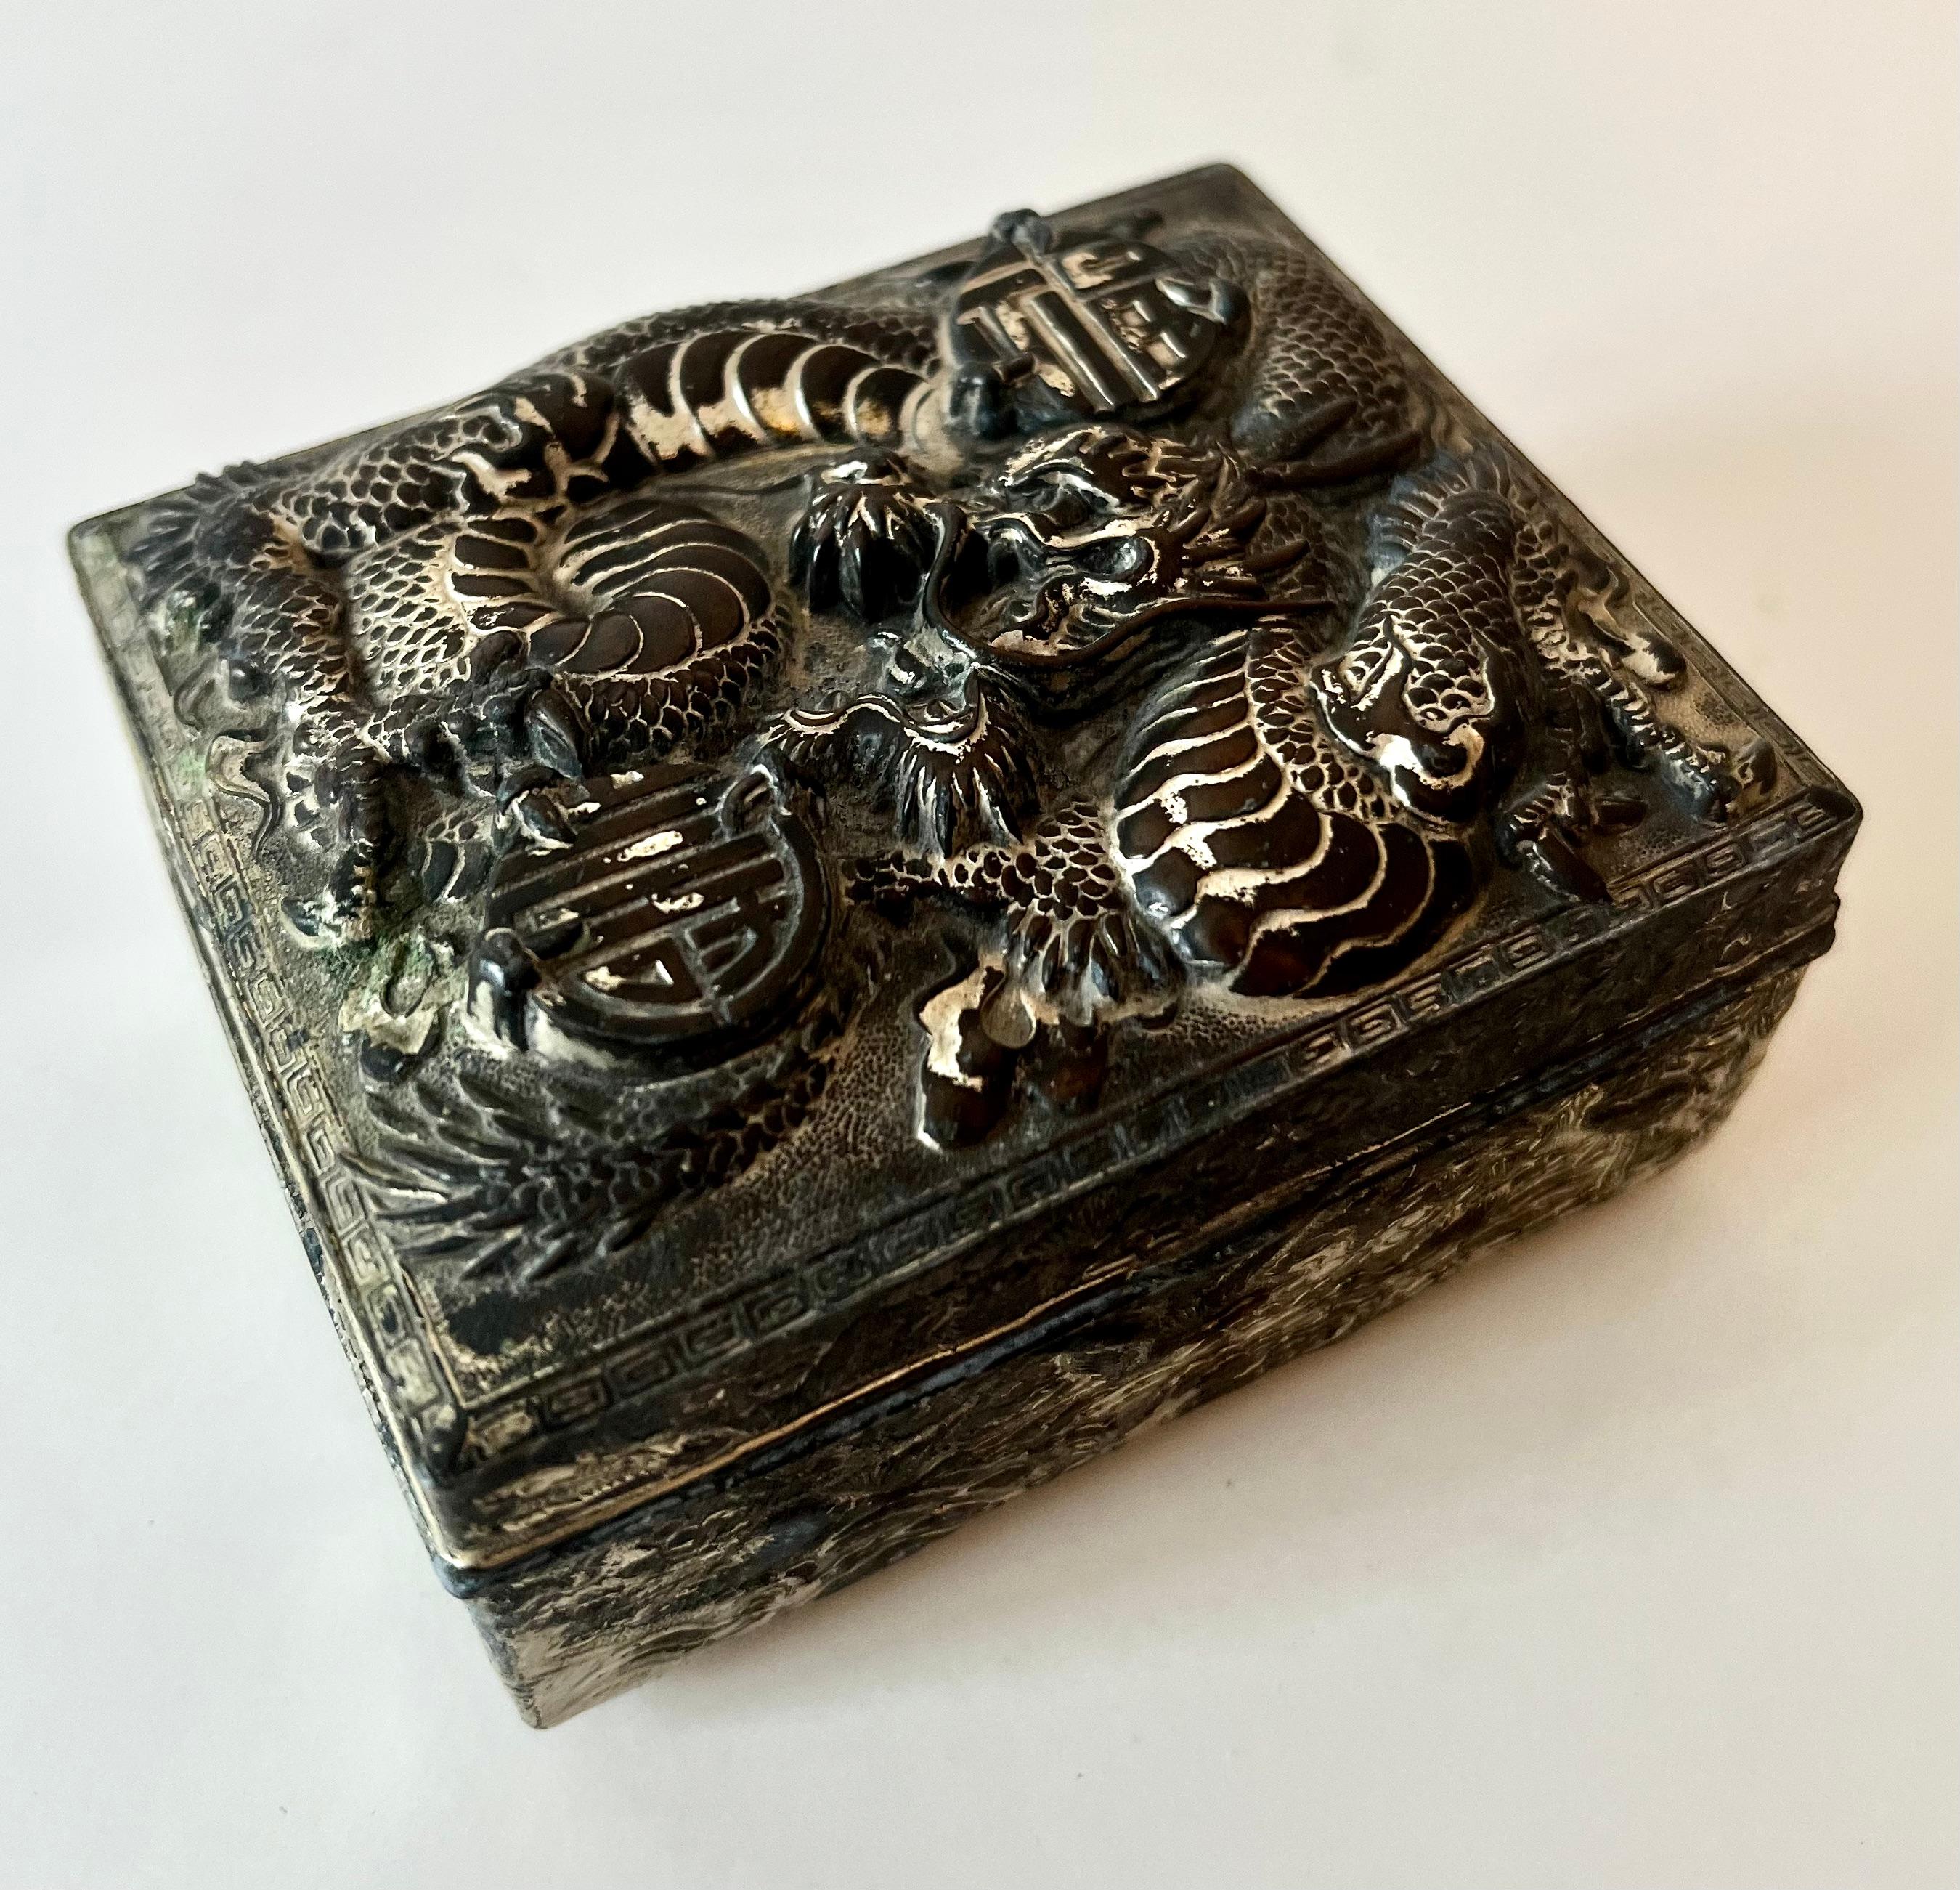 a delightful little silver box, heavily patinated. The interior is wood and while the box used to be hinged, it still closes and opens as a lidded box. 

A compliment to any desk or side table - purely for decor or to hold anything from paper